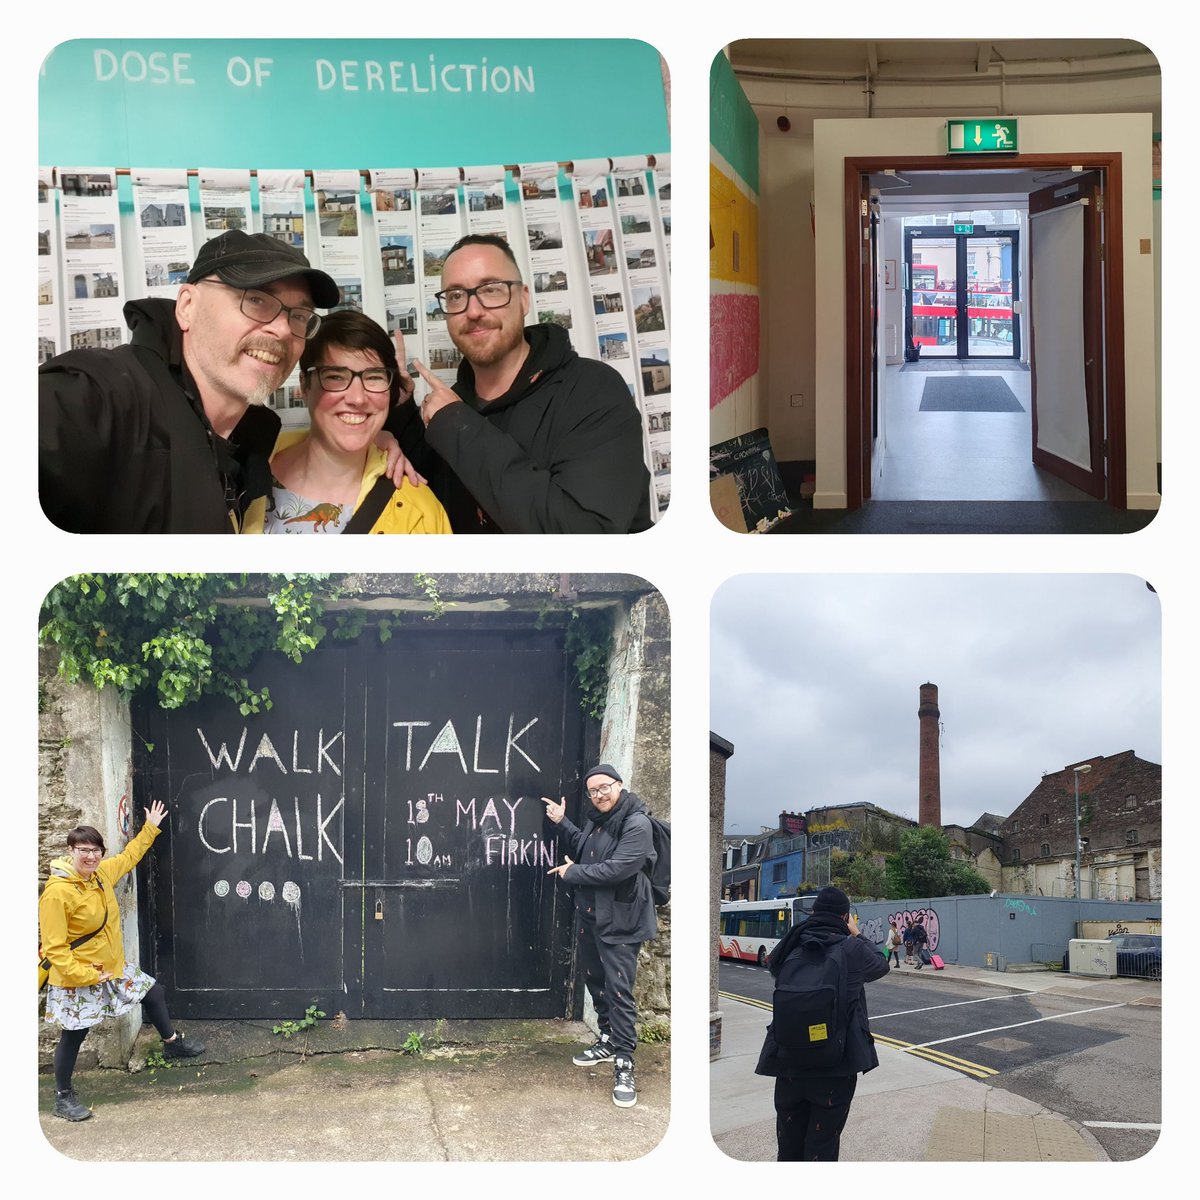 Final preparations incl. route walk for our inaugural #WalkTalkChalk with our special guest @godonagh See you tomorrow at 10am at @DanceCorkFC It's time to take back our city for the benefit of the people of Cork #DerelictIreland #RestPlayWork #RegenerativePlacemaking